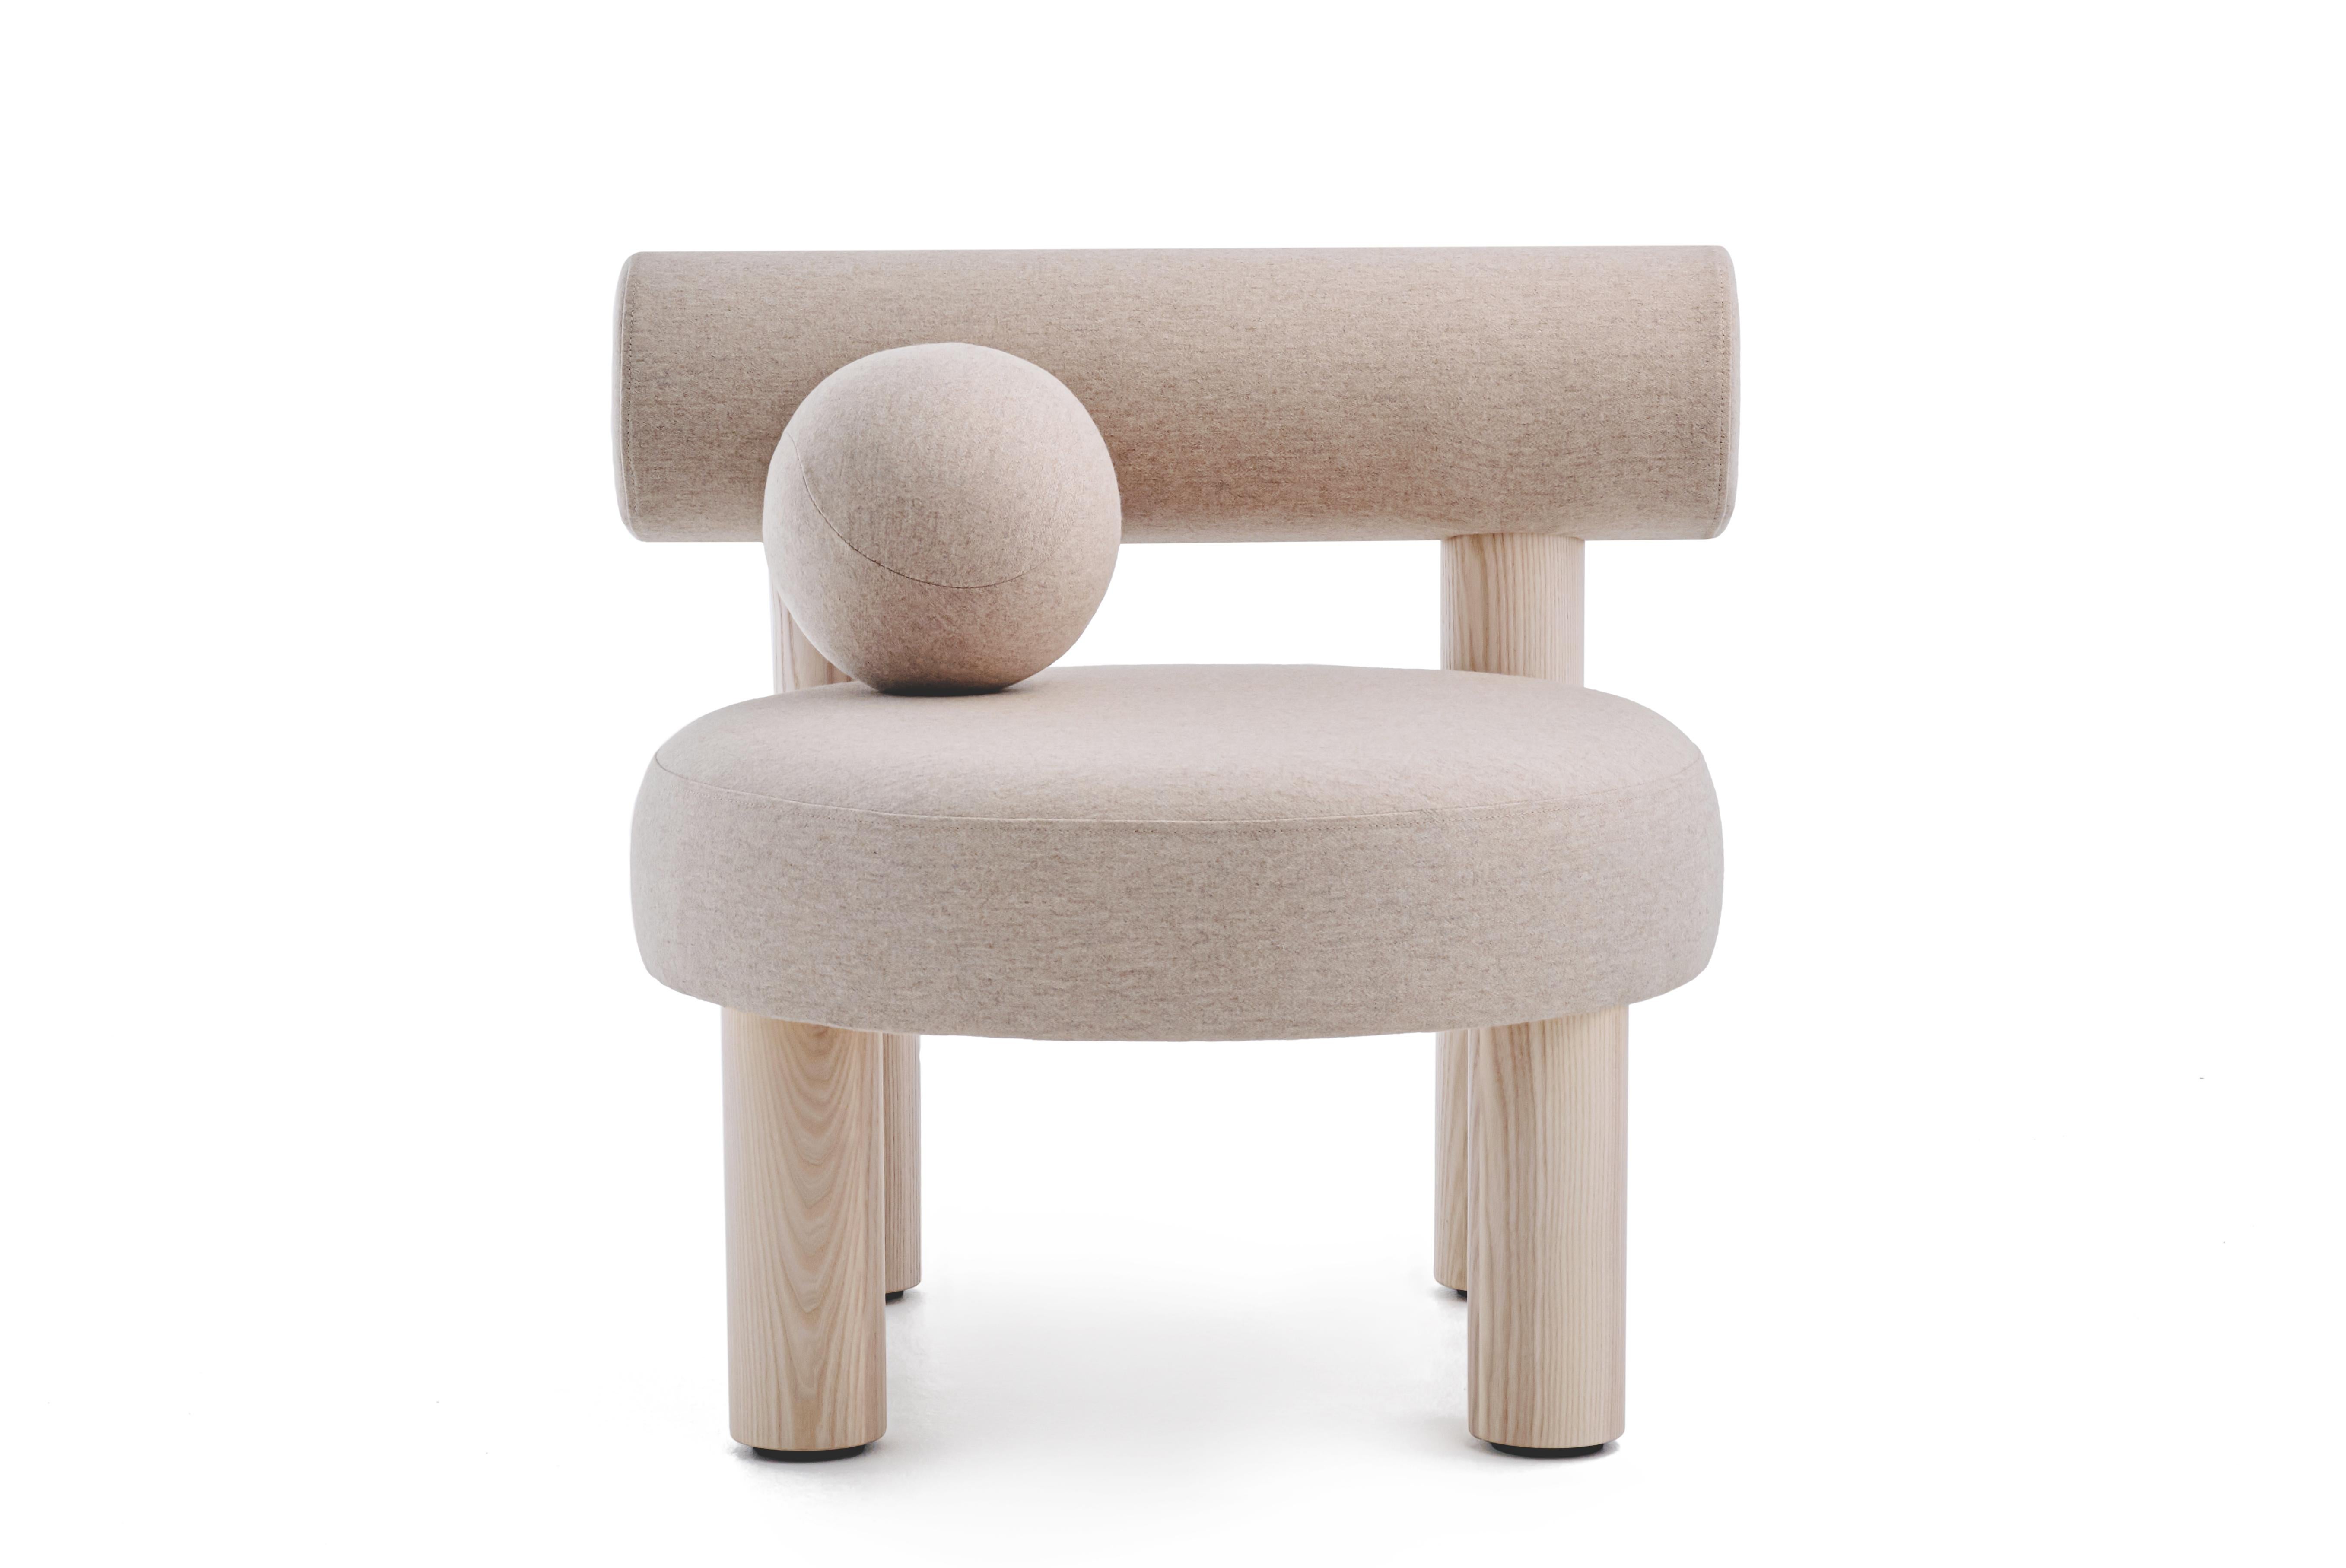 Low chair GROPIUS CS1 by Noom
Model : Category Wool - Calico 29
Designer: Kateryna Sokolova

Dimensions:
Height: 71 cm / 27,95 in
Width: 75 cm / 29,53 in
Depth: 75 cm / 29,53 in
Seat height: 44 cm / 17,32 in

New NOOM furniture collection is